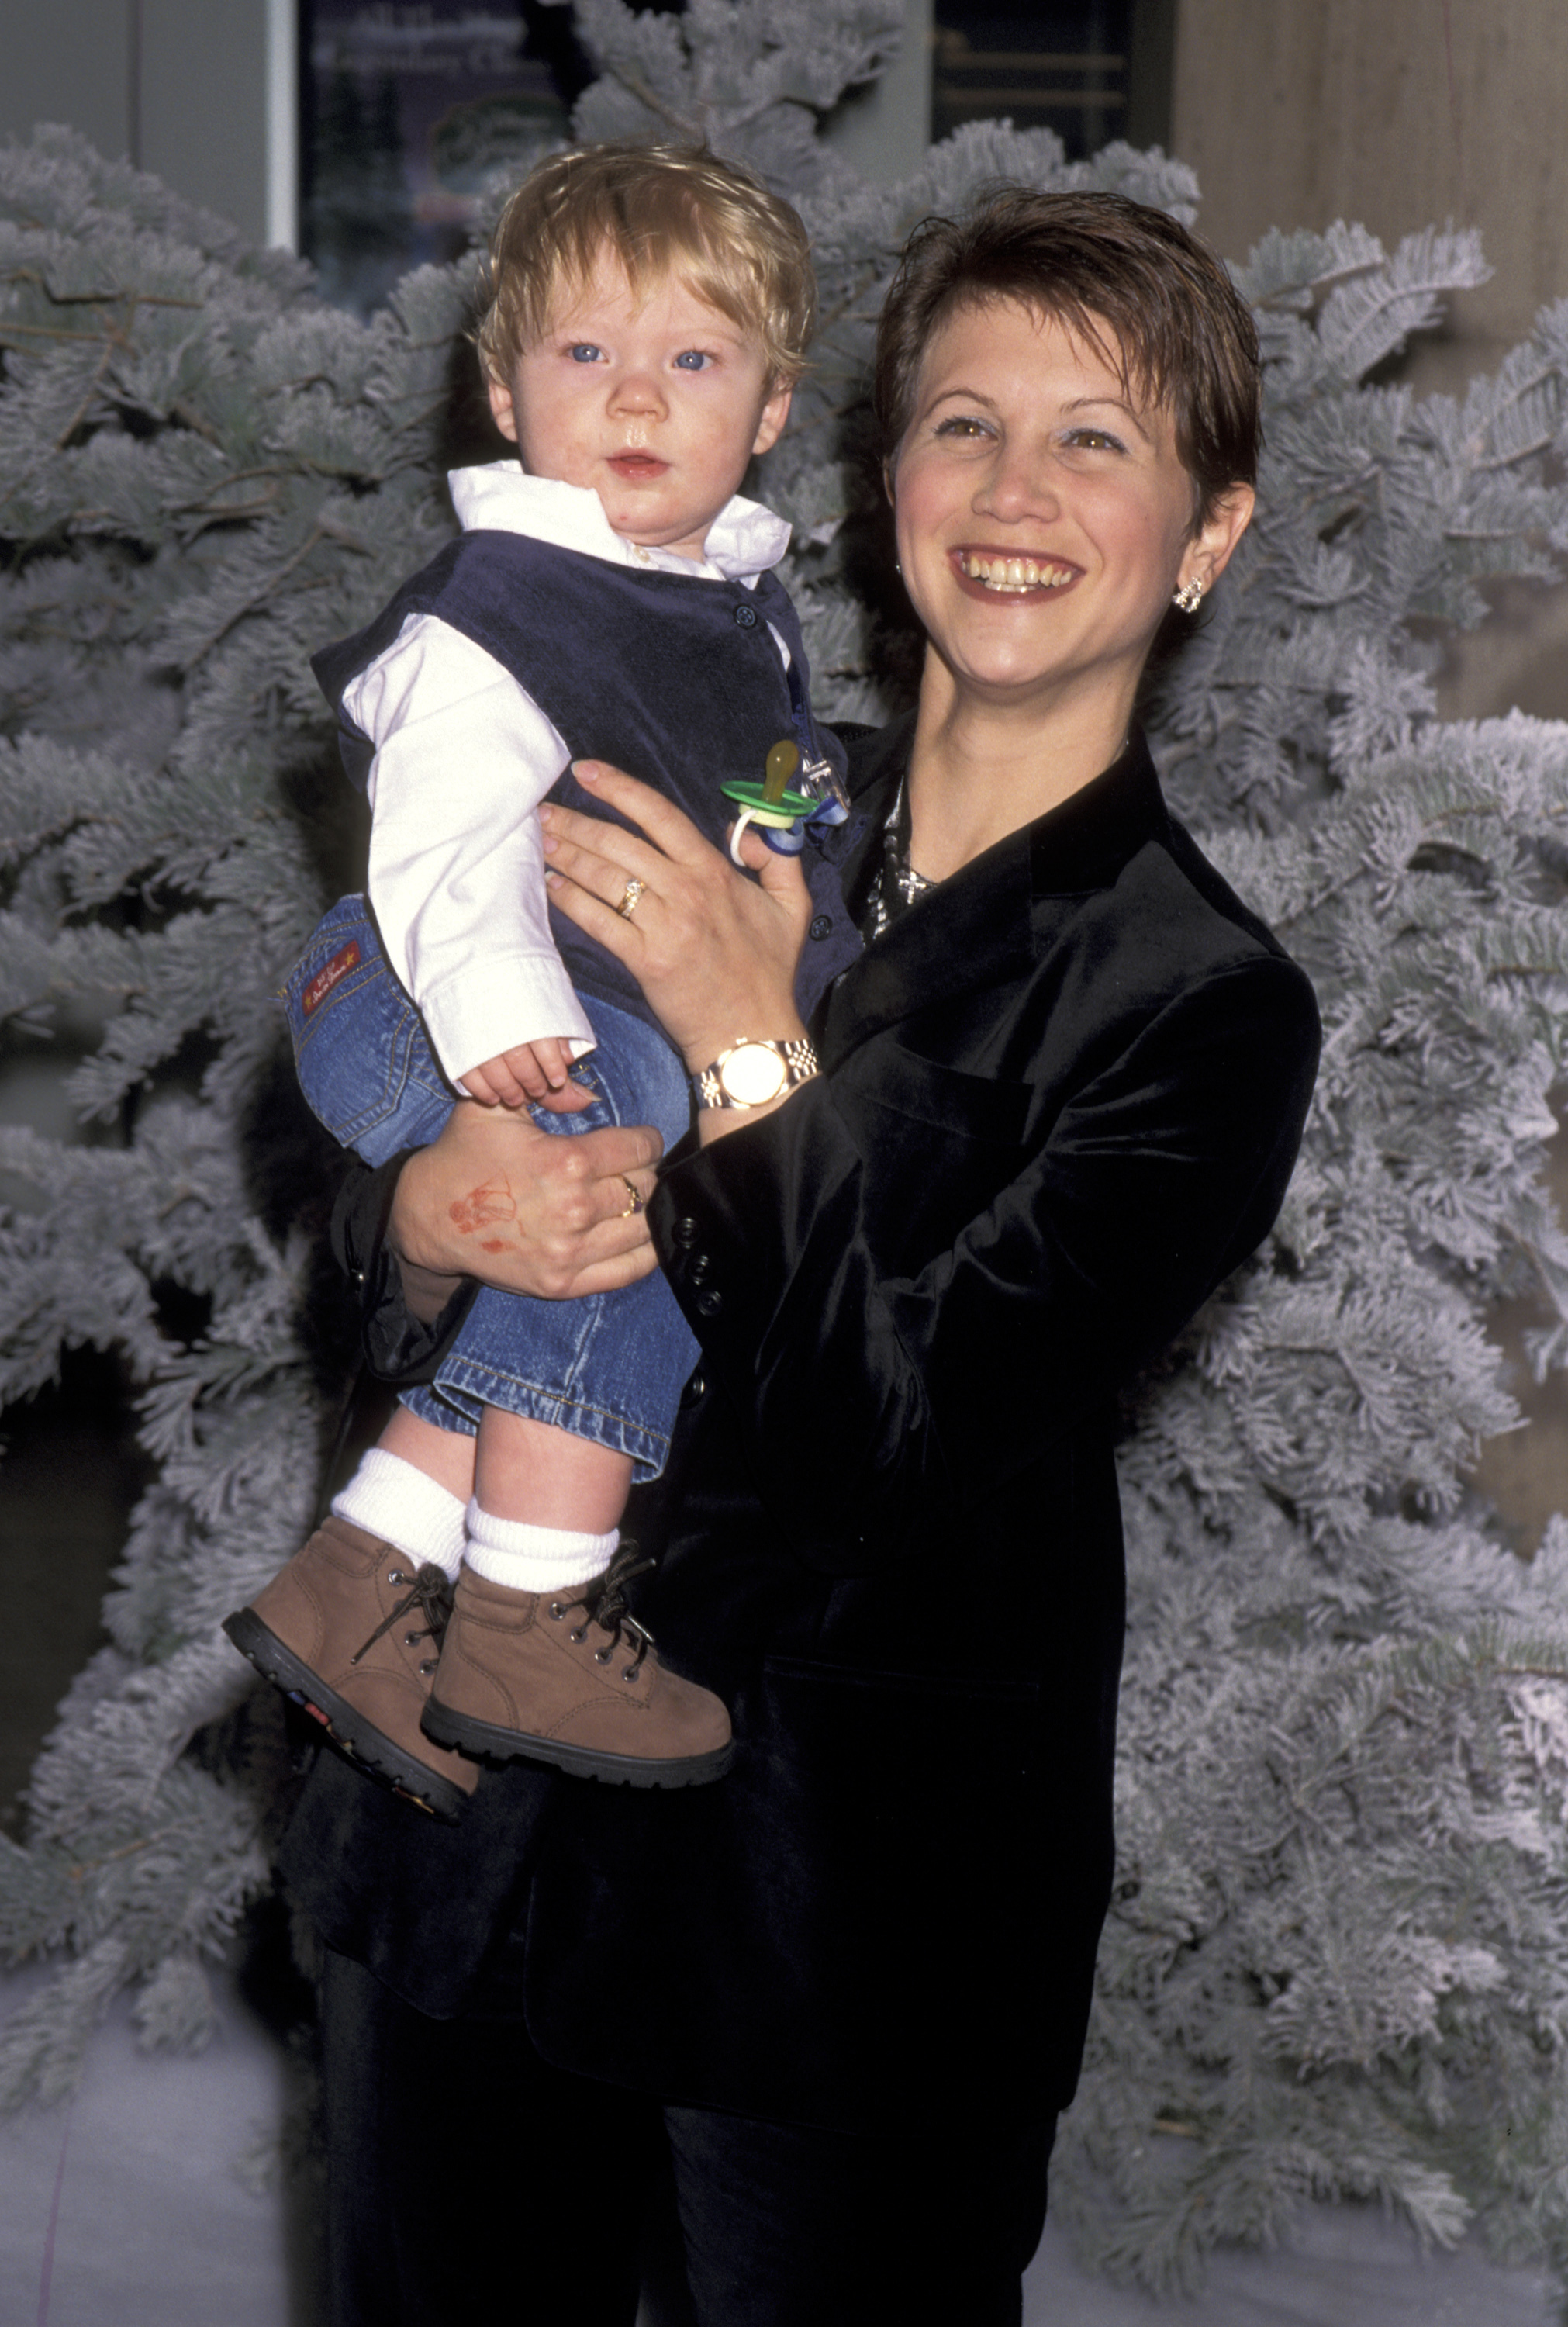 Tracey Gold and her son during the video release celebration for Disney's "Beauty & The Beast" on November 6, 1997, in Century City, California. | Source: Getty Images